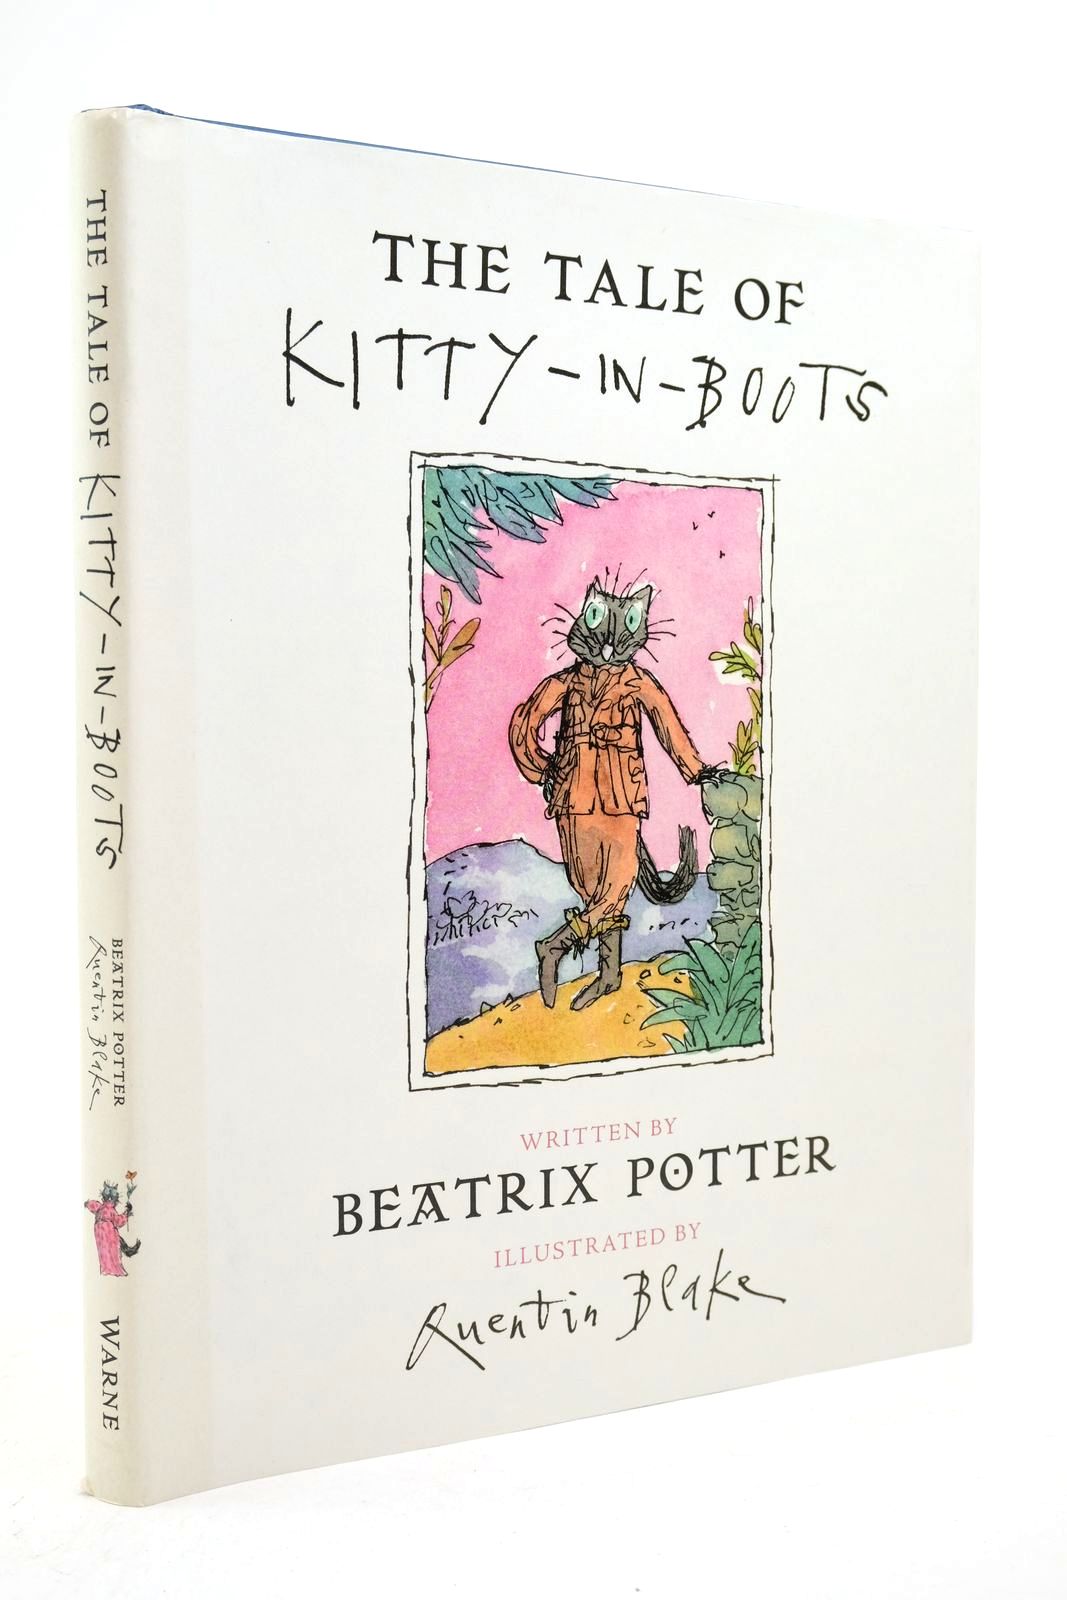 Photo of THE TALE OF KITTY-IN-BOOTS written by Potter, Beatrix illustrated by Blake, Quentin published by Frederick Warne (STOCK CODE: 2139849)  for sale by Stella & Rose's Books